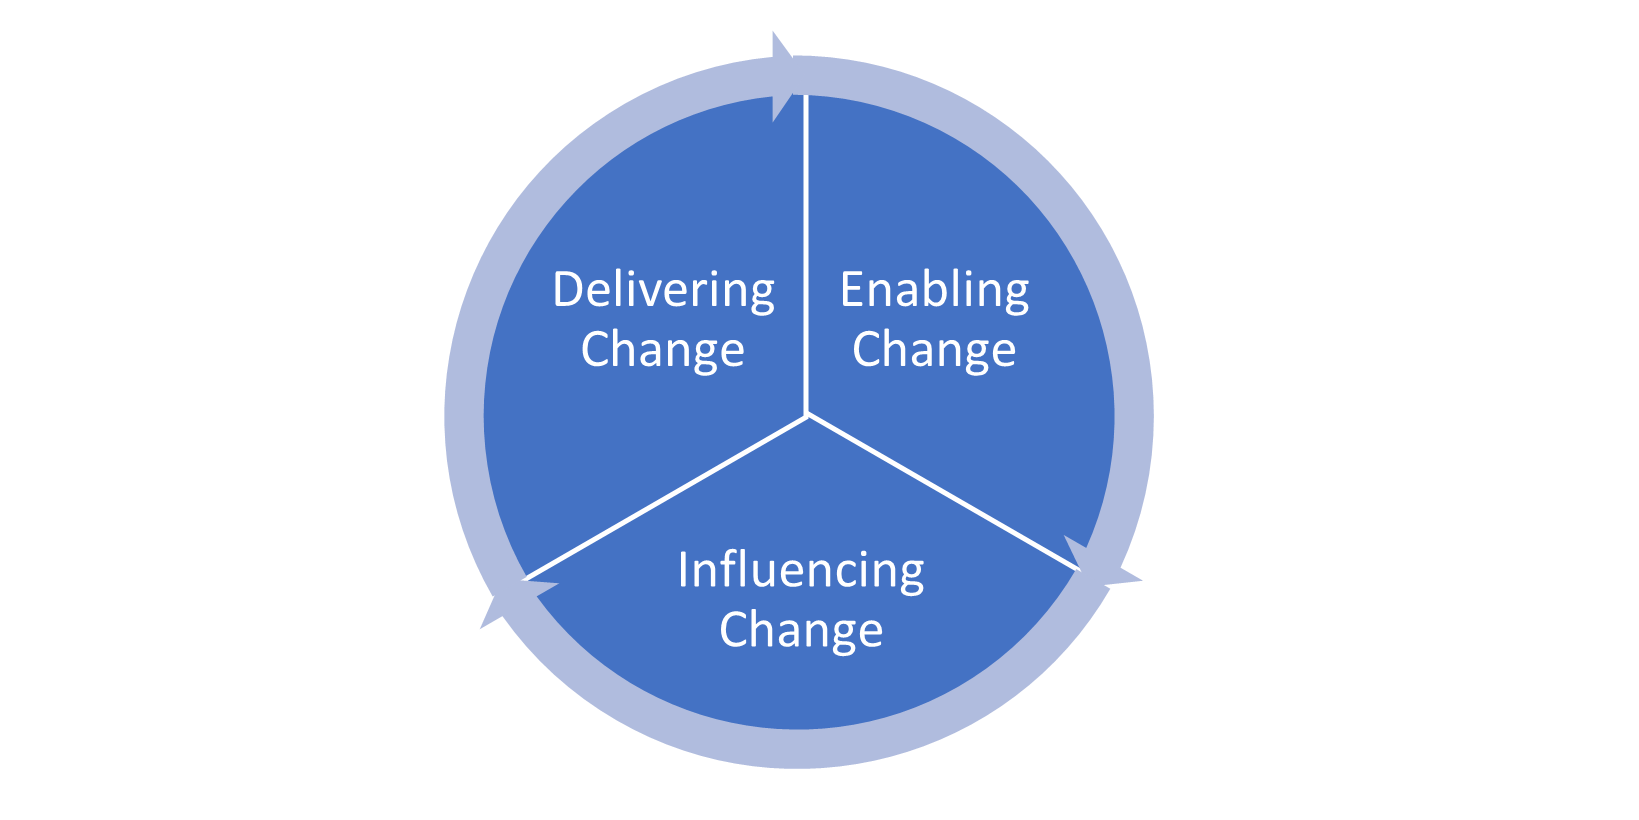 Wheel showing delivering, enabling and influencing change